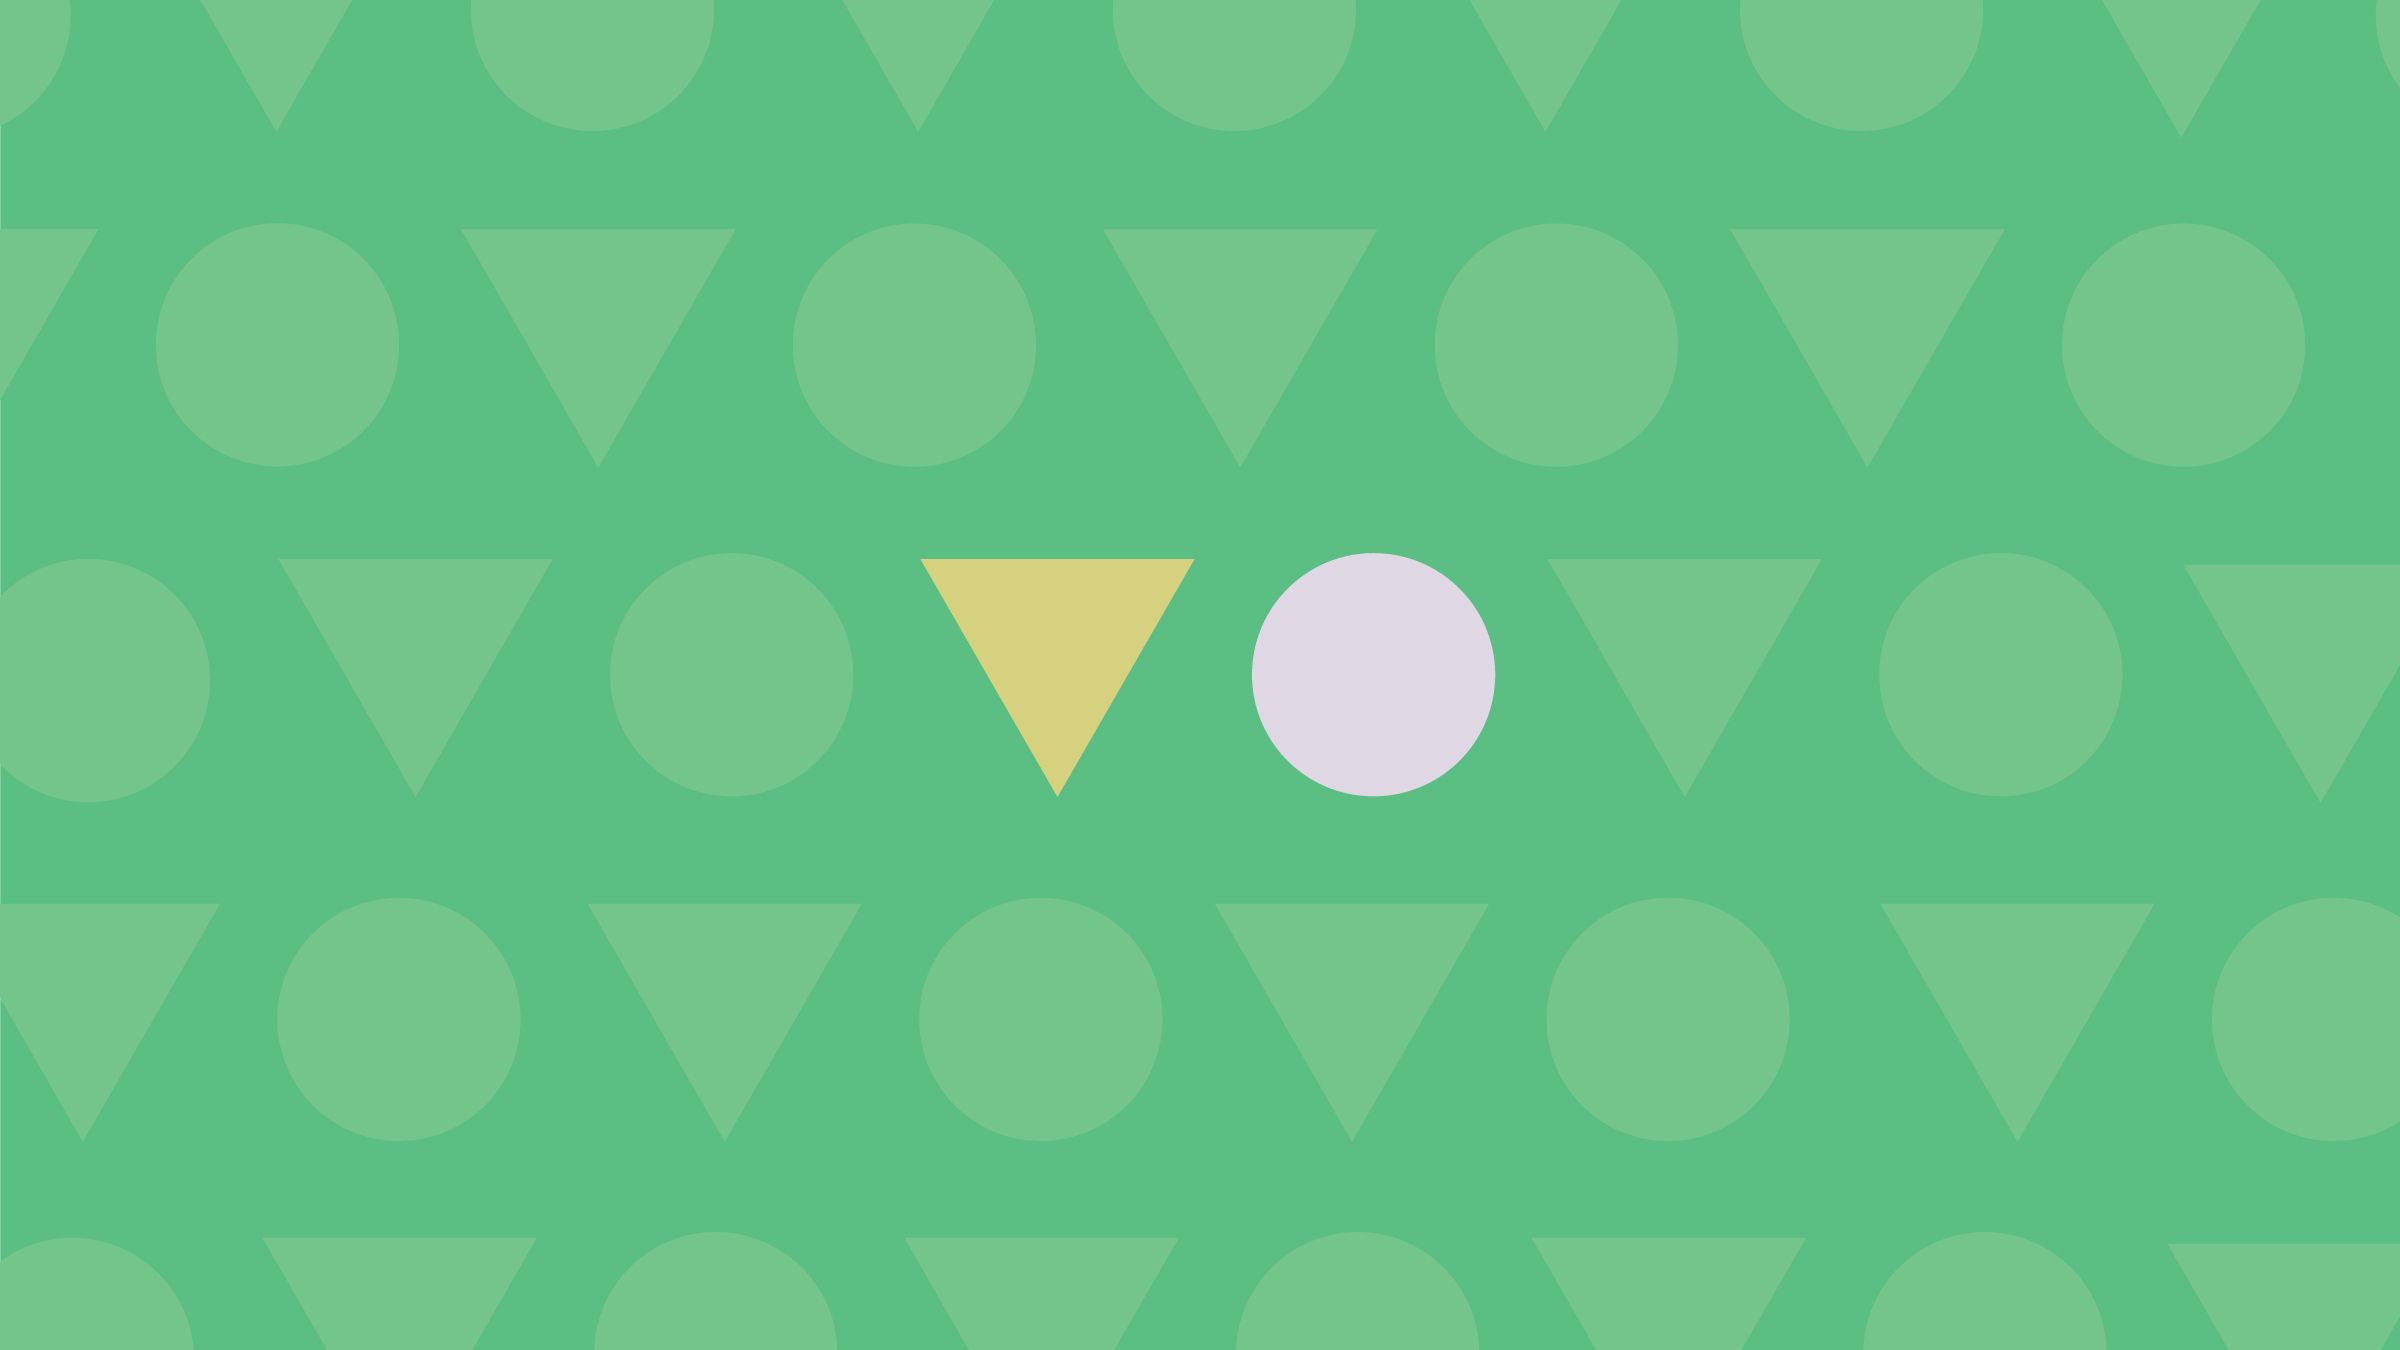 Cover image with green background and yellow triangle next to white circle